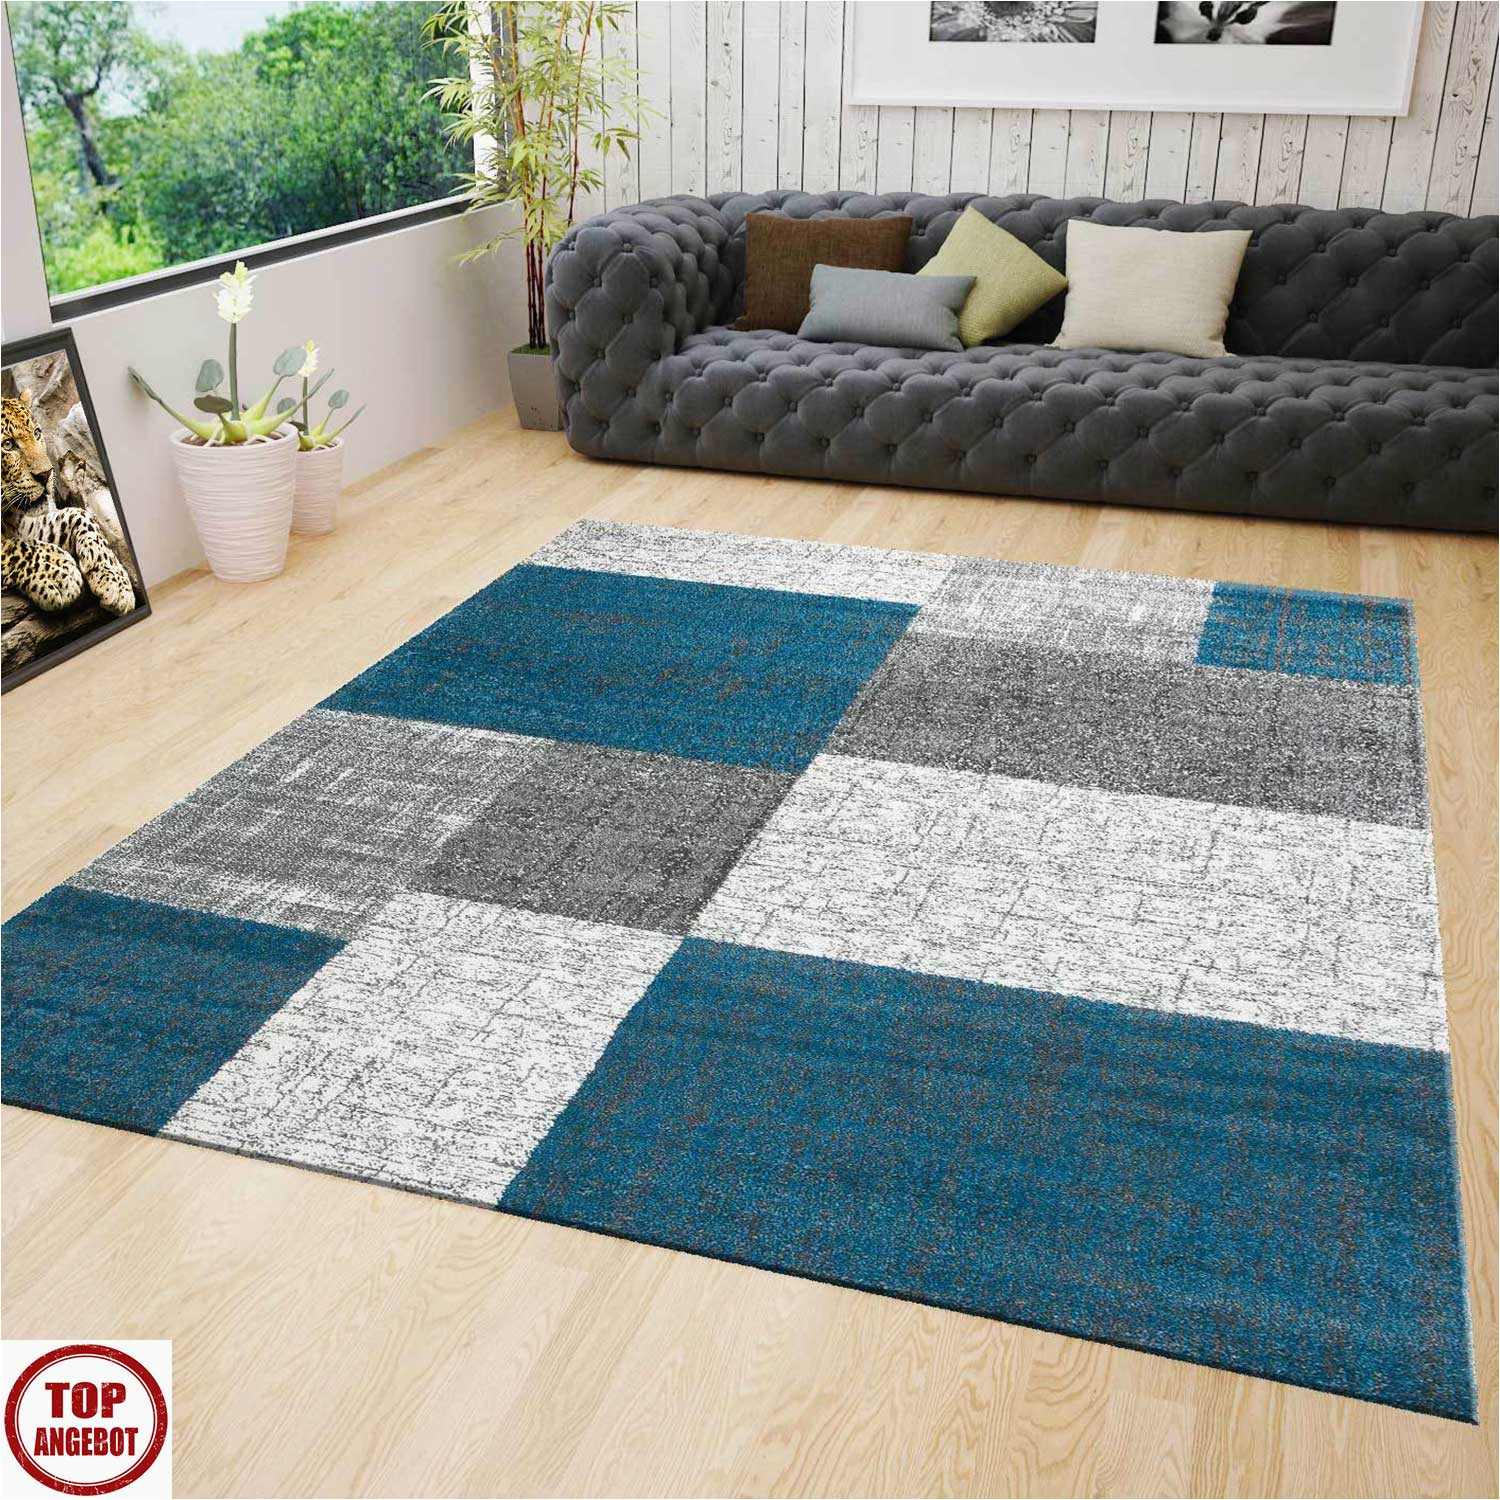 Grey Blue White Rug Living Room Rug Modern Rug with Checkered Patterns Short Pile Turquoise Grey White Colors- R7778 Rio7778_turkis Plentyshop Lts